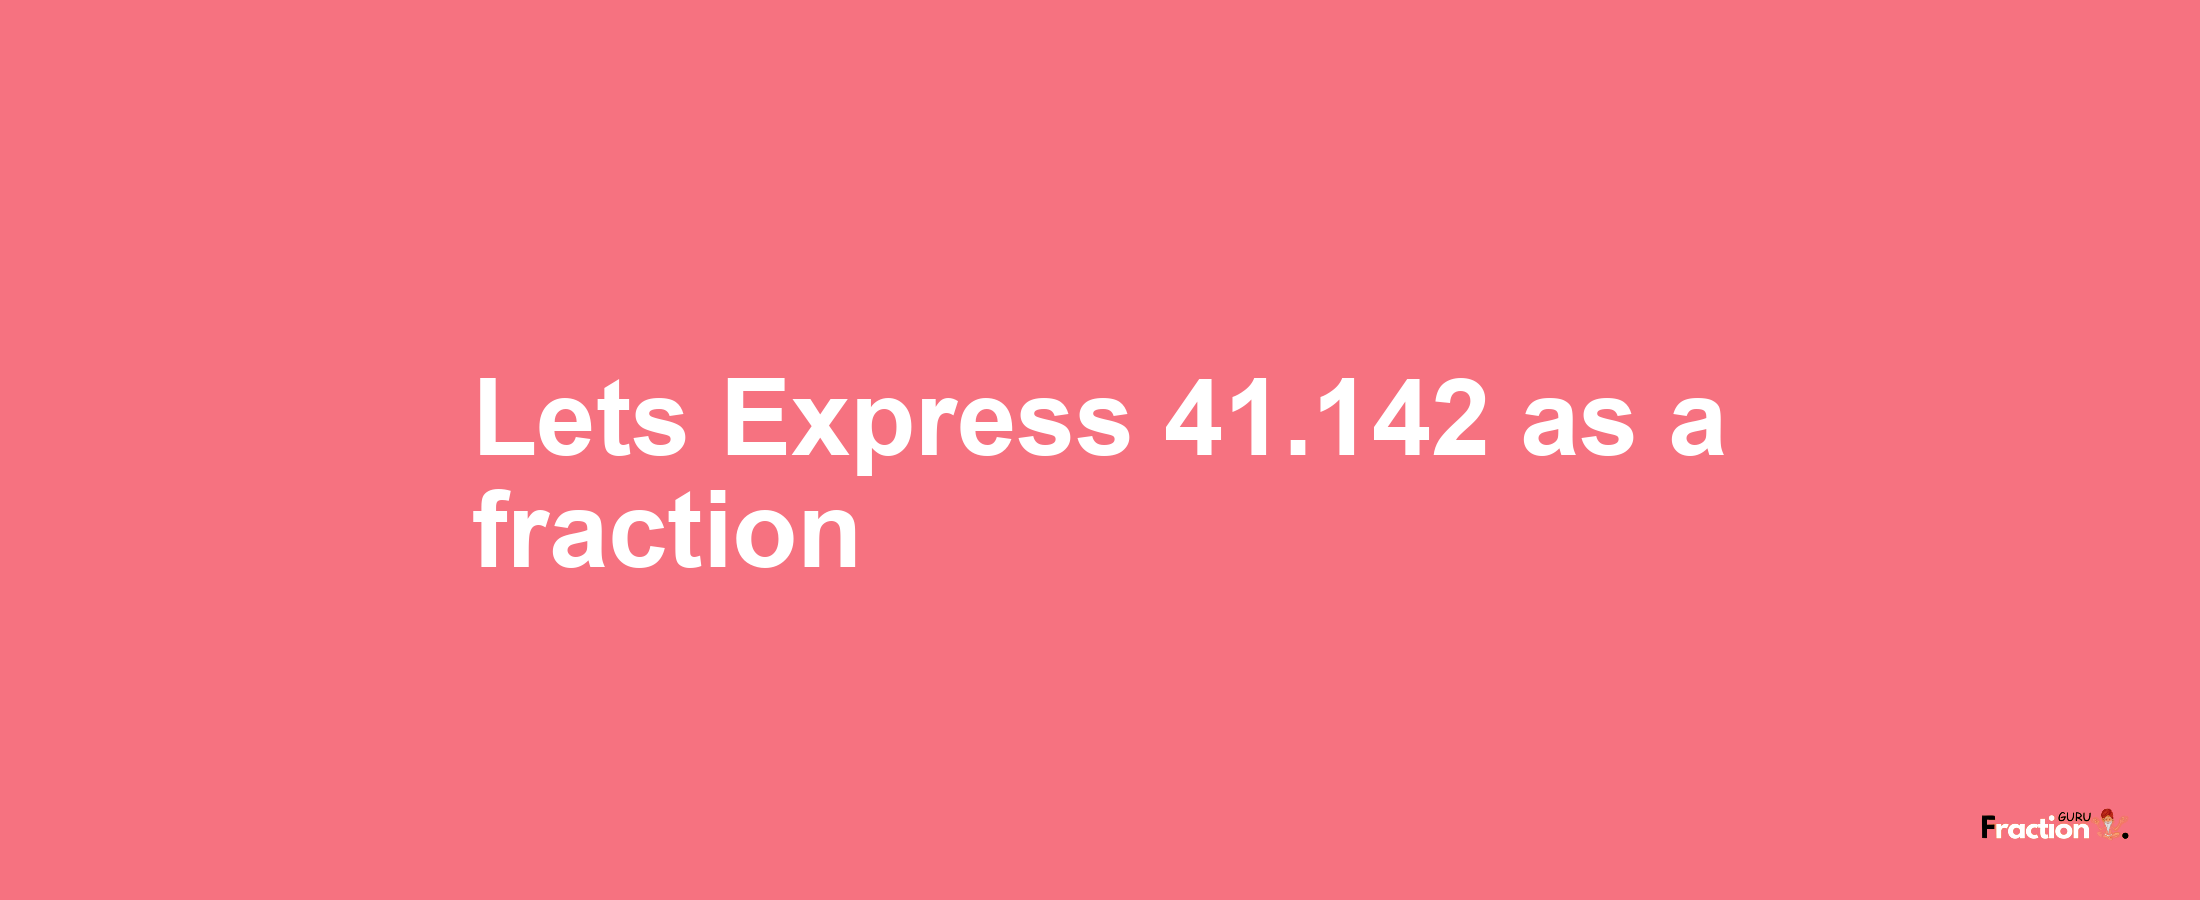 Lets Express 41.142 as afraction